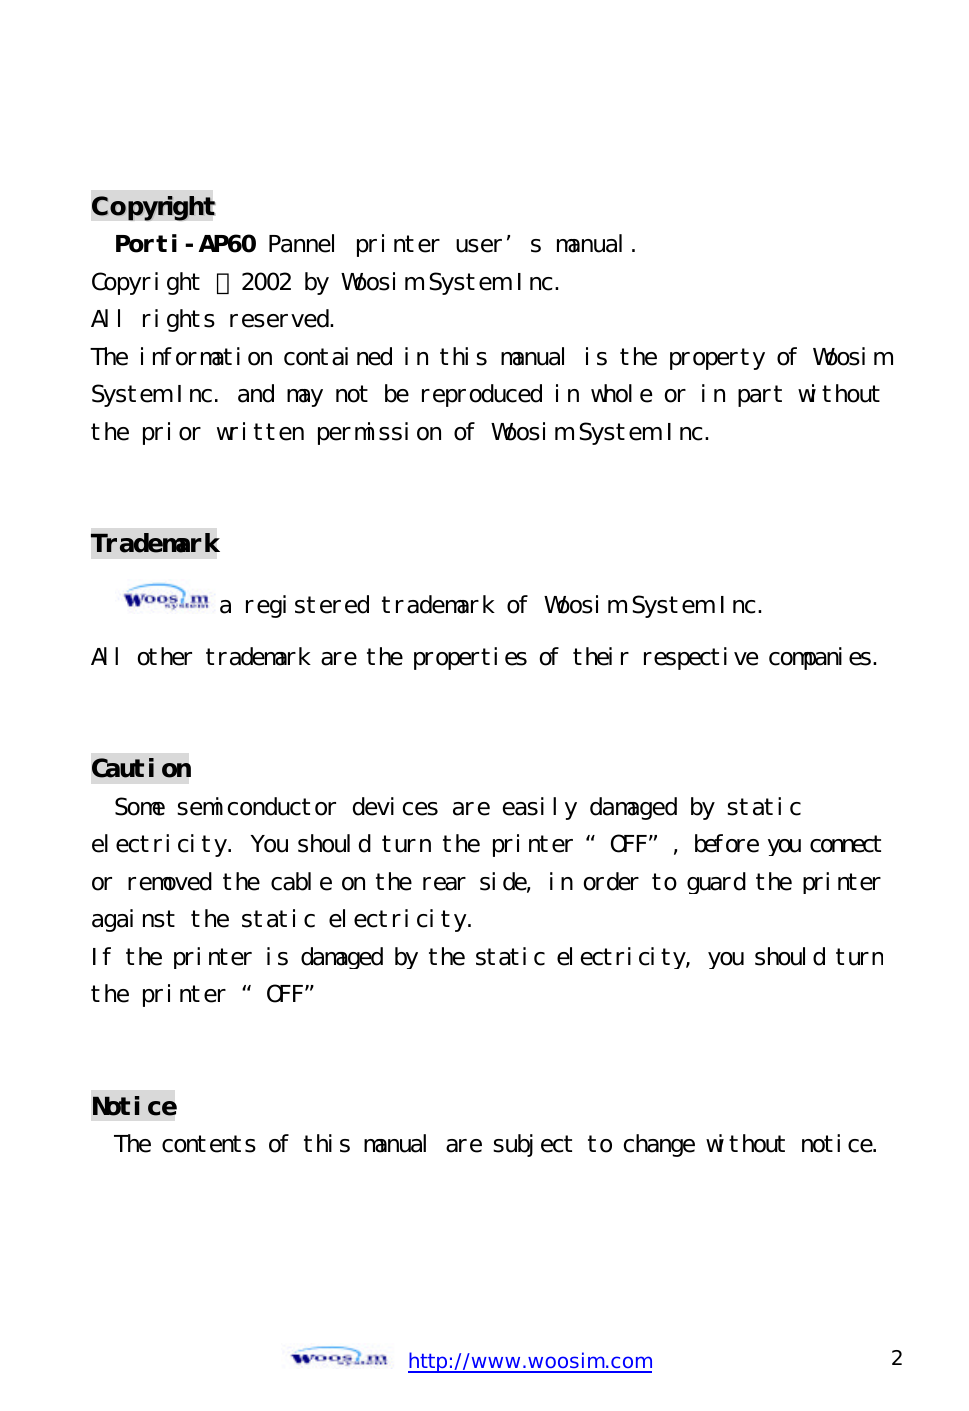  http://www.woosim.com 2                                CCooppyyrriigghhtt  Porti-AP60 Pannel printer user’s manual. Copyright ⓒ2002 by Woosim System Inc. All rights reserved. The information contained in this manual is the property of WoosimSystem Inc. and may not be reproduced in whole or in part withoutthe prior written permission of Woosim System Inc.   Trademark a registered trademark of Woosim System Inc. All other trademark are the properties of their respective companies.  Caution Some semiconductor devices are easily damaged by static electricity. You should turn the printer “OFF”, before you connect or removed the cable on the rear side, in order to guard the printer against the static electricity.  If the printer is damaged by the static electricity, you should turn the printer “OFF”   Notice The contents of this manual are subject to change without notice.